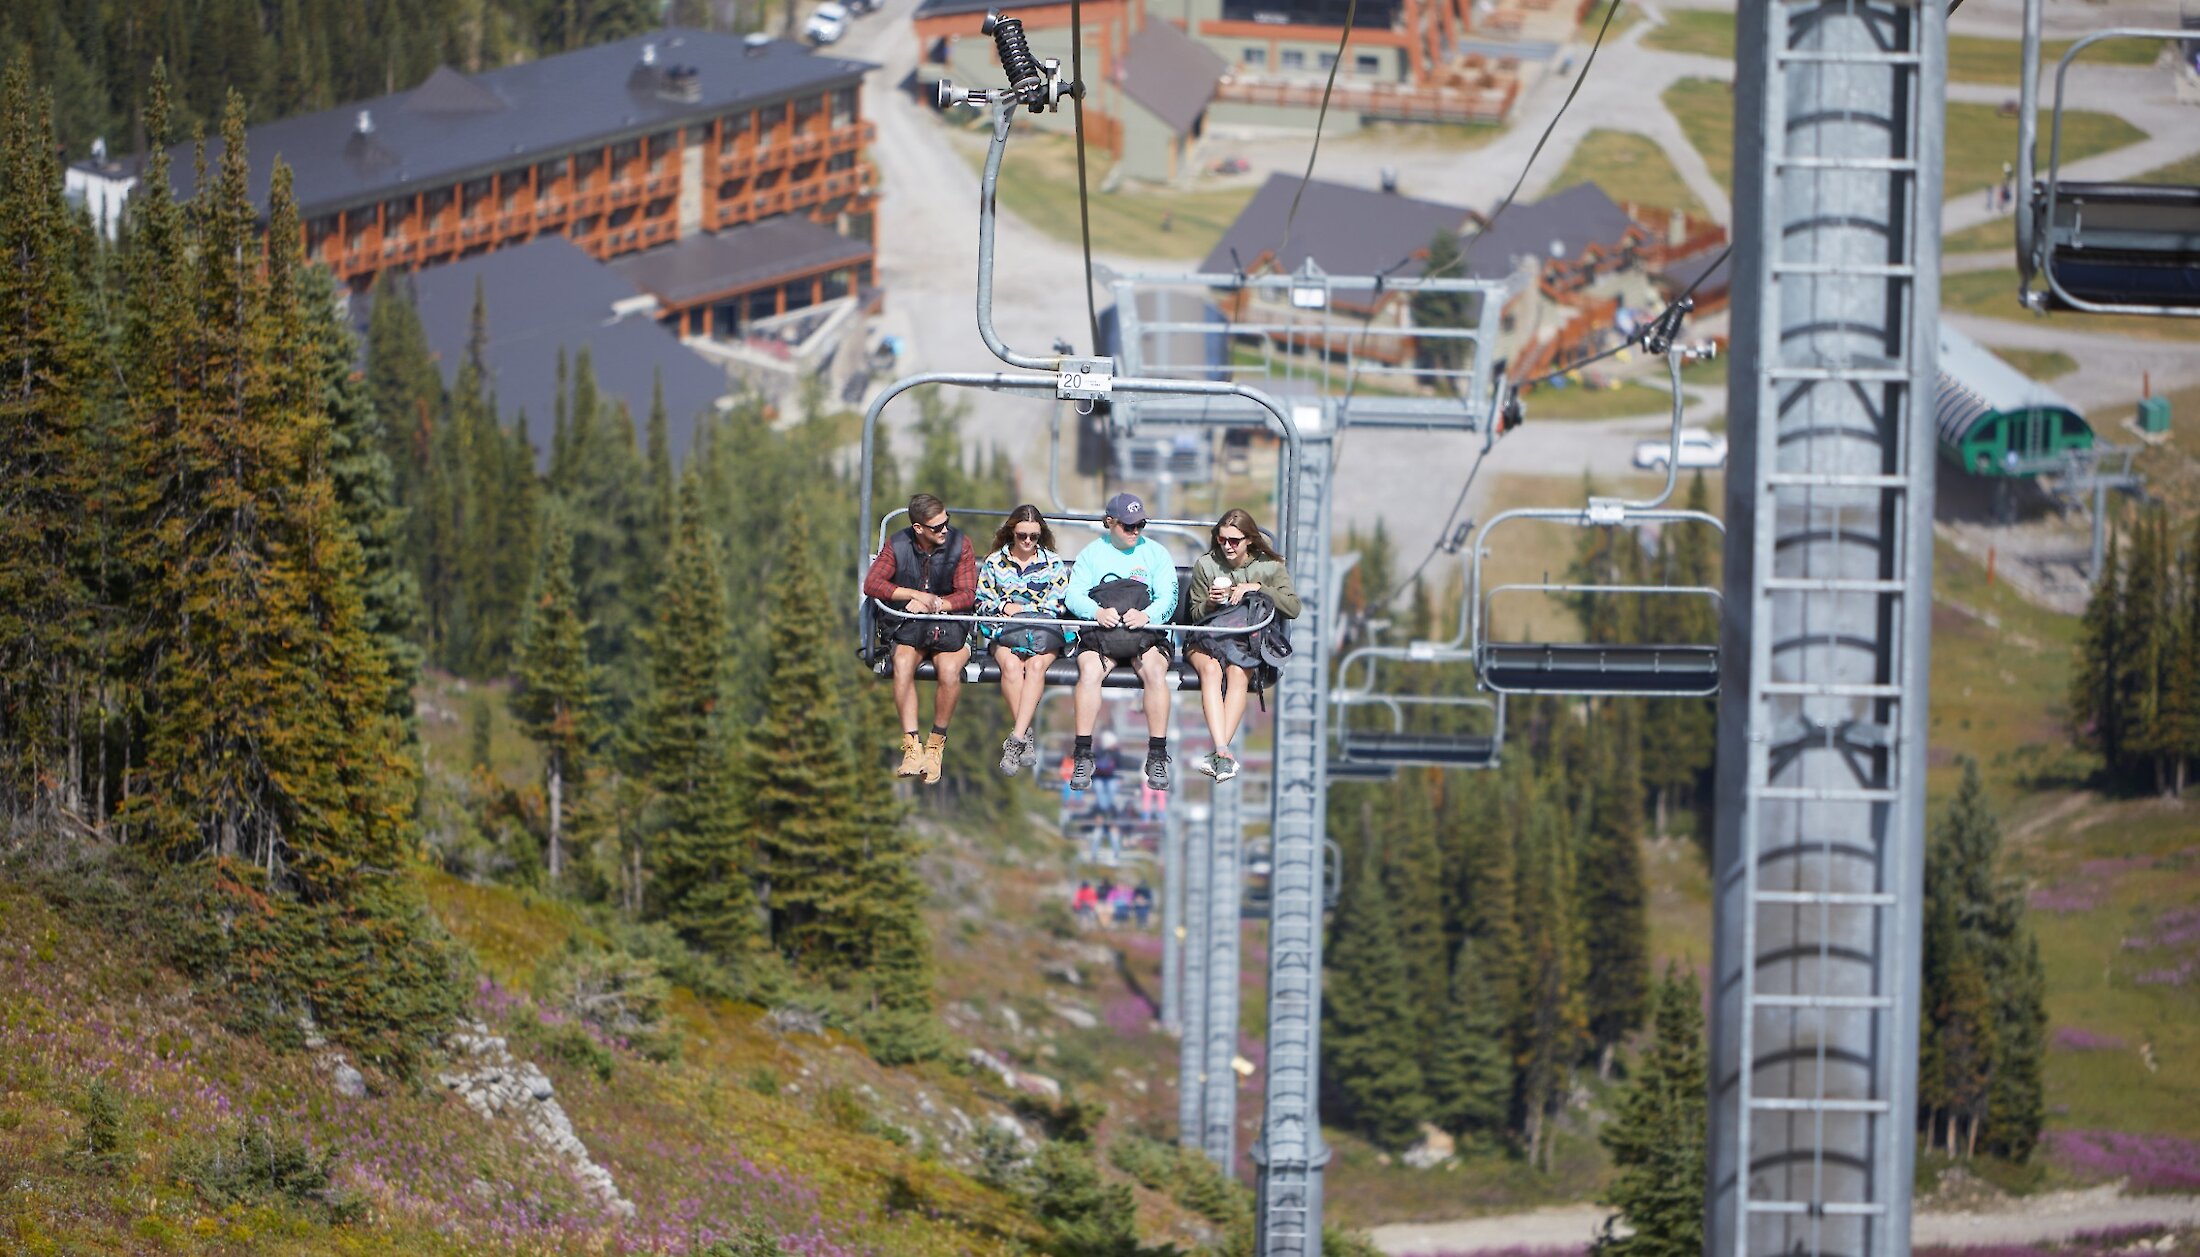 Standish chairlift at Sunshine Meadows